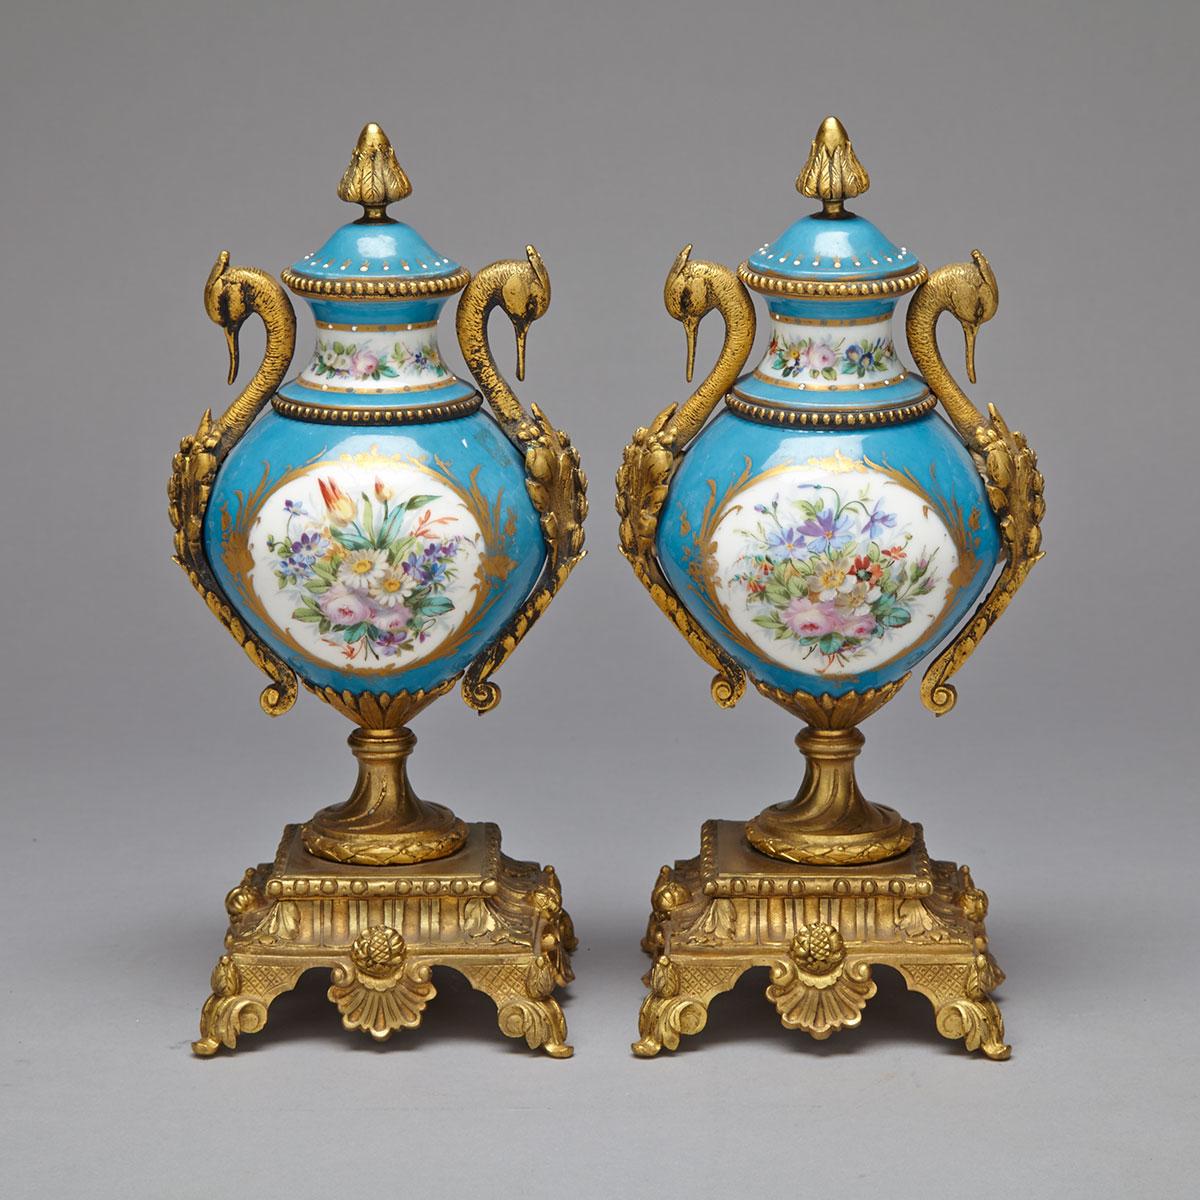 Pair of Sevres Style Porcelain Mounted Covered Urns, c.1860